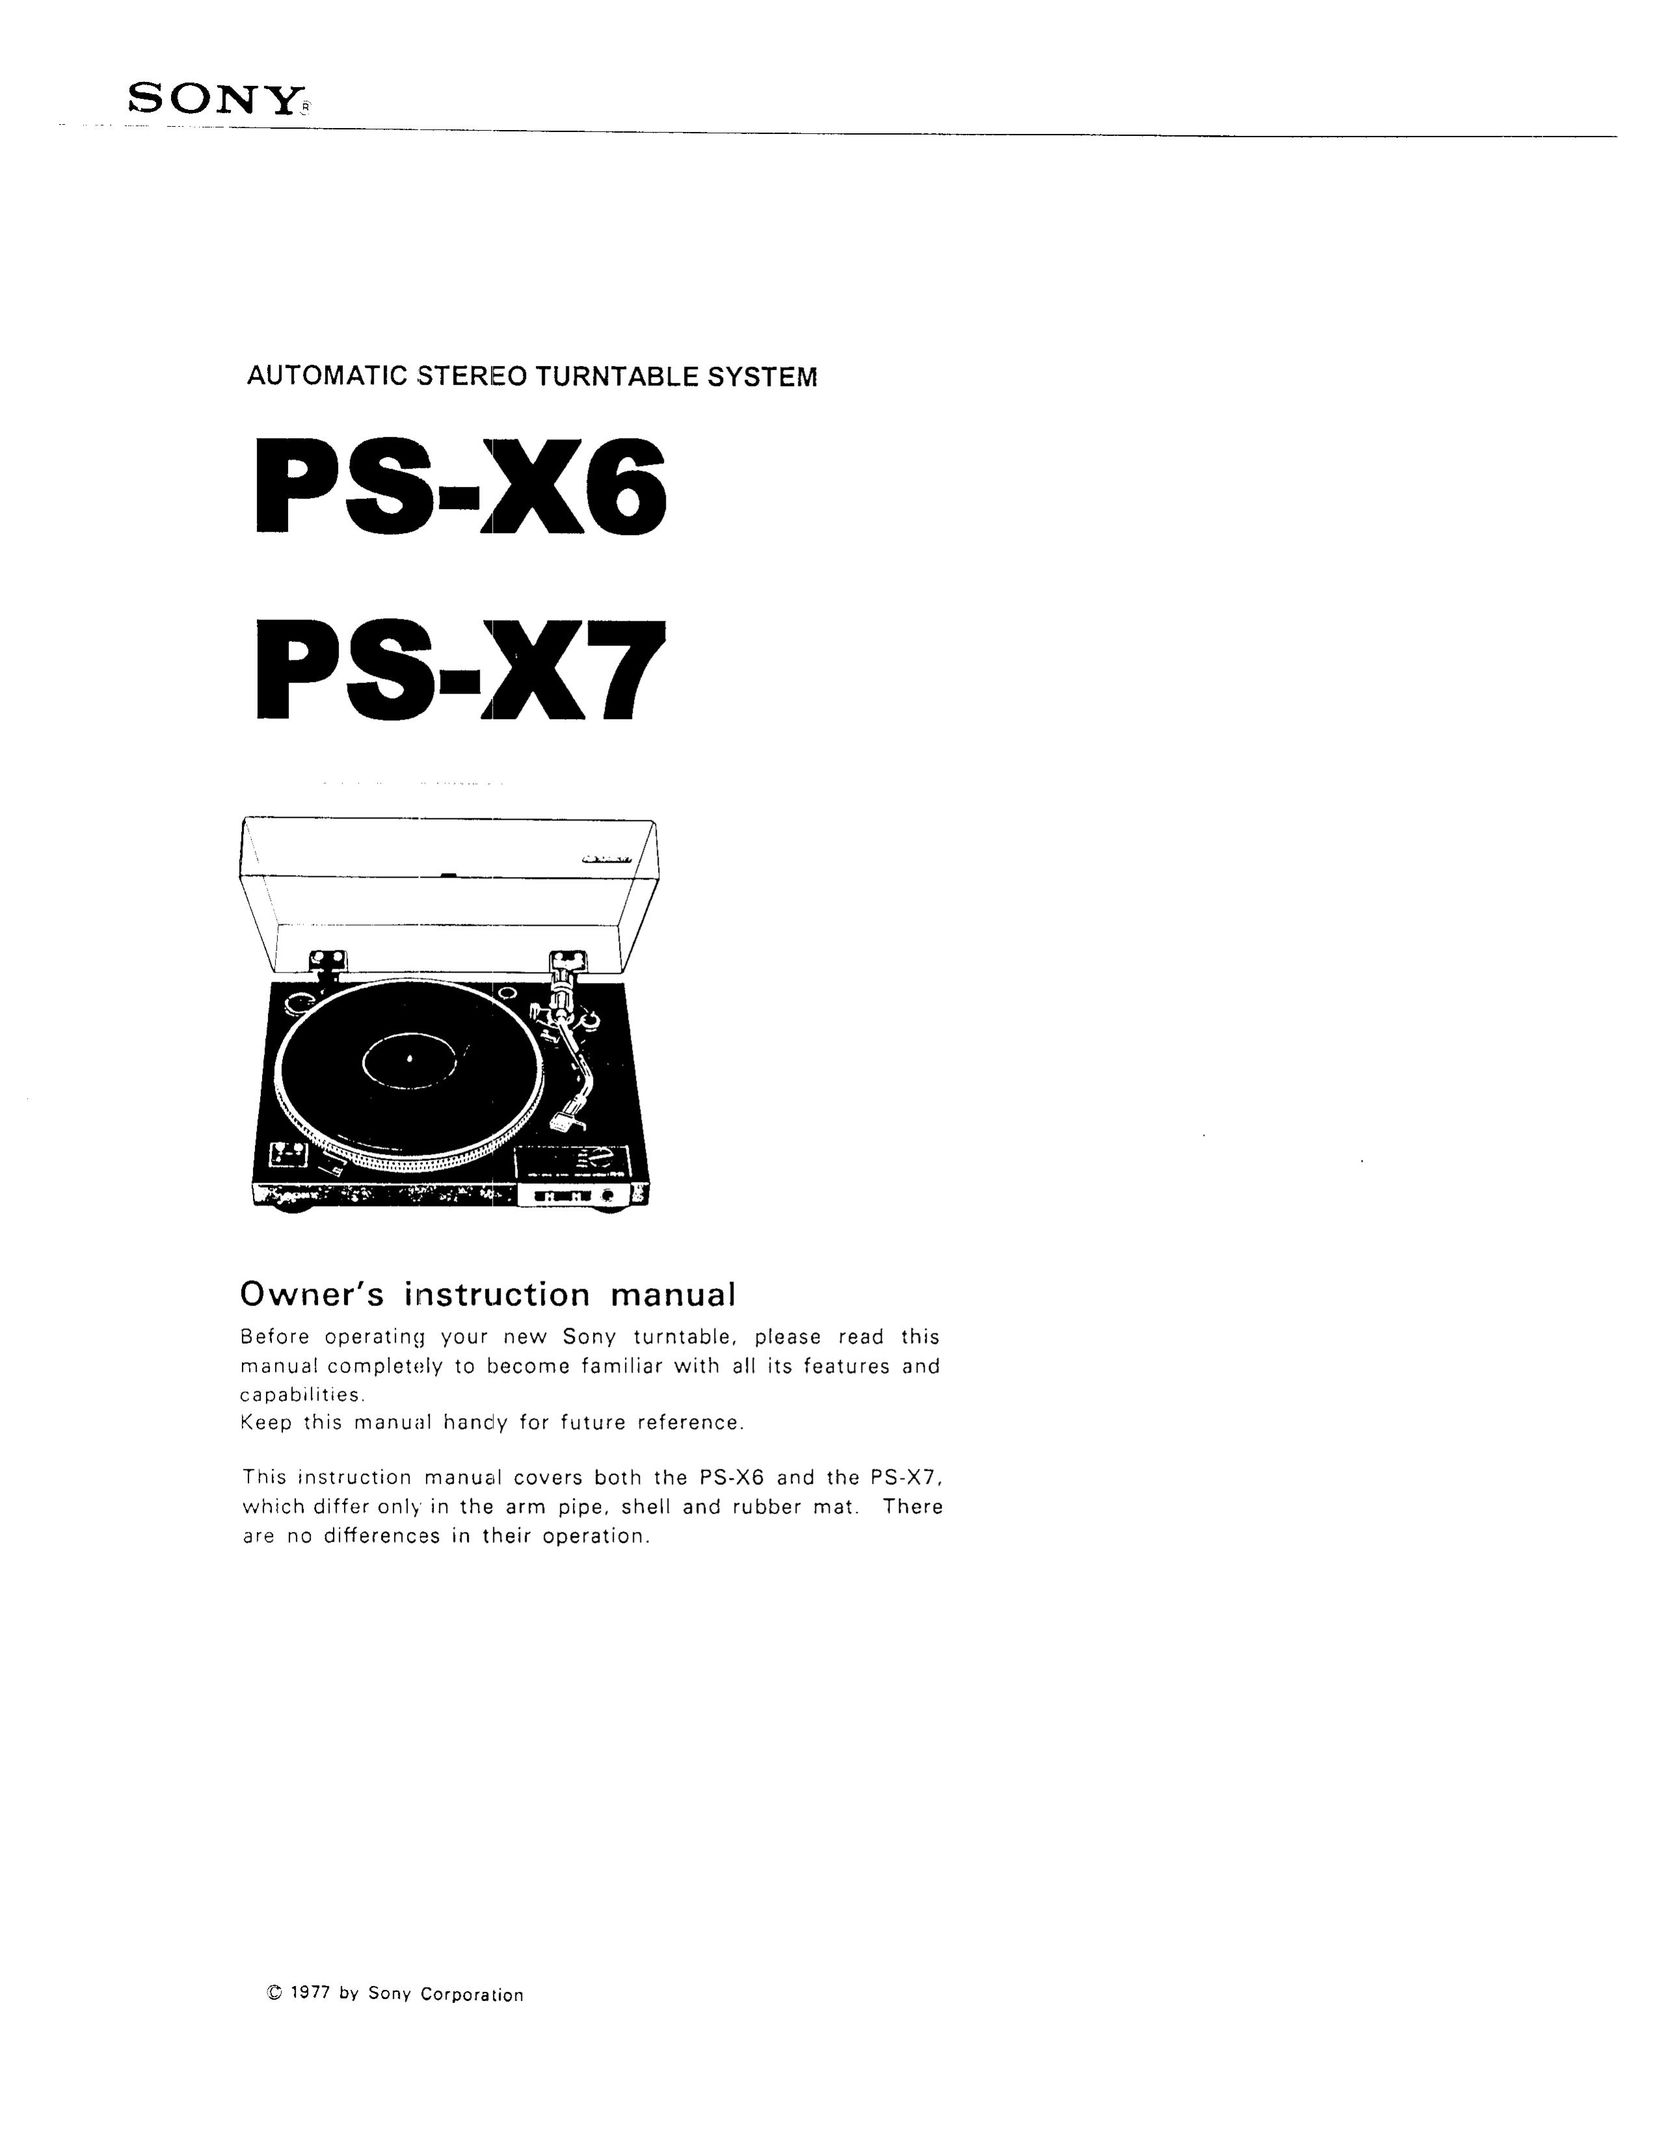 Sony PS-X7 Turntable User Manual